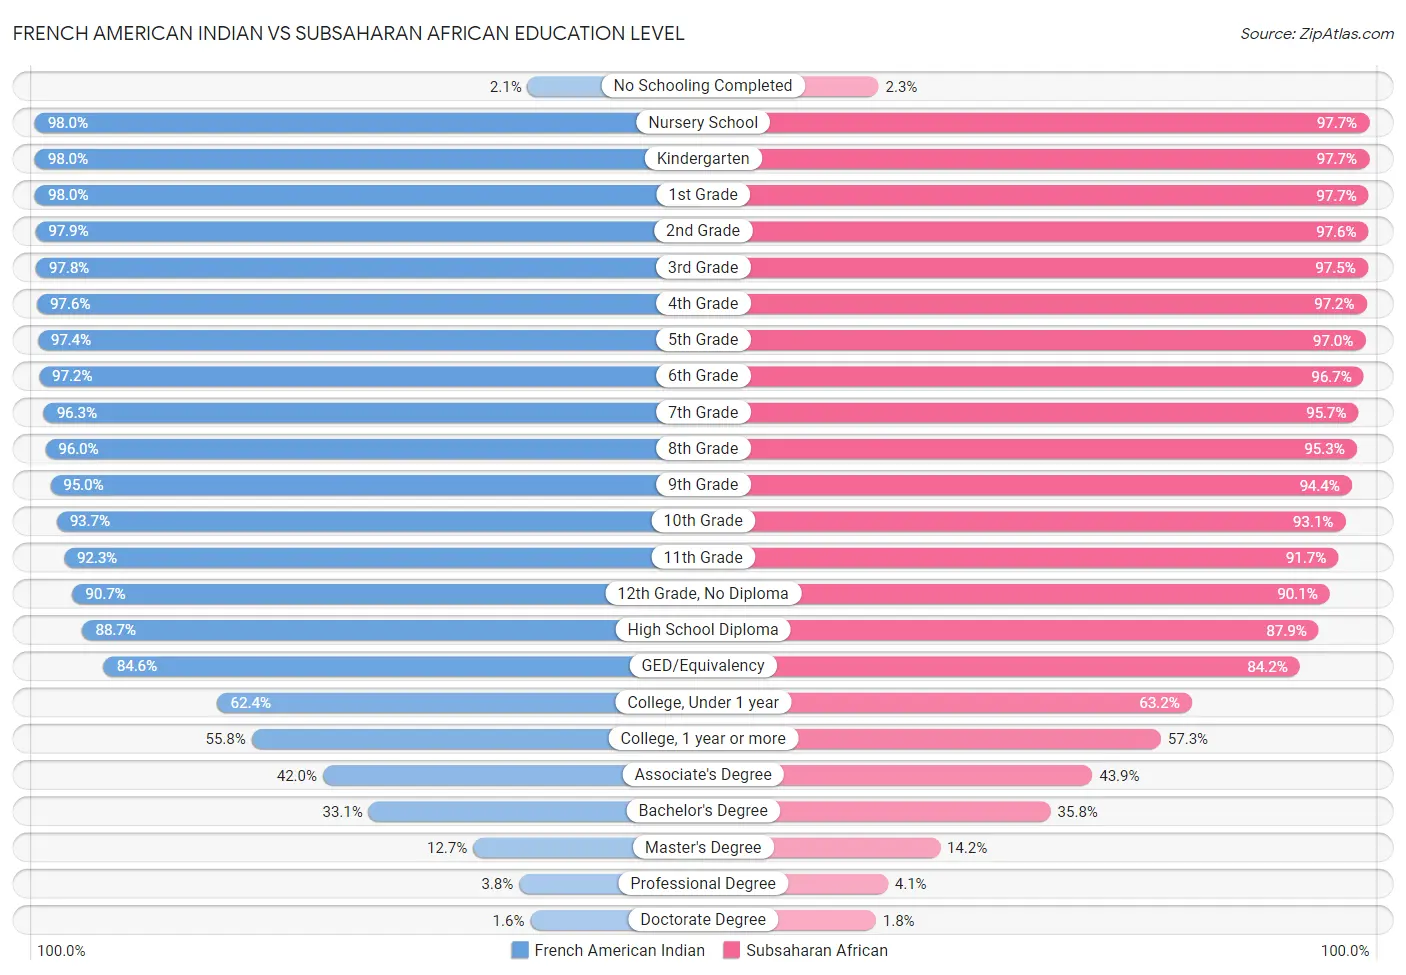 French American Indian vs Subsaharan African Education Level